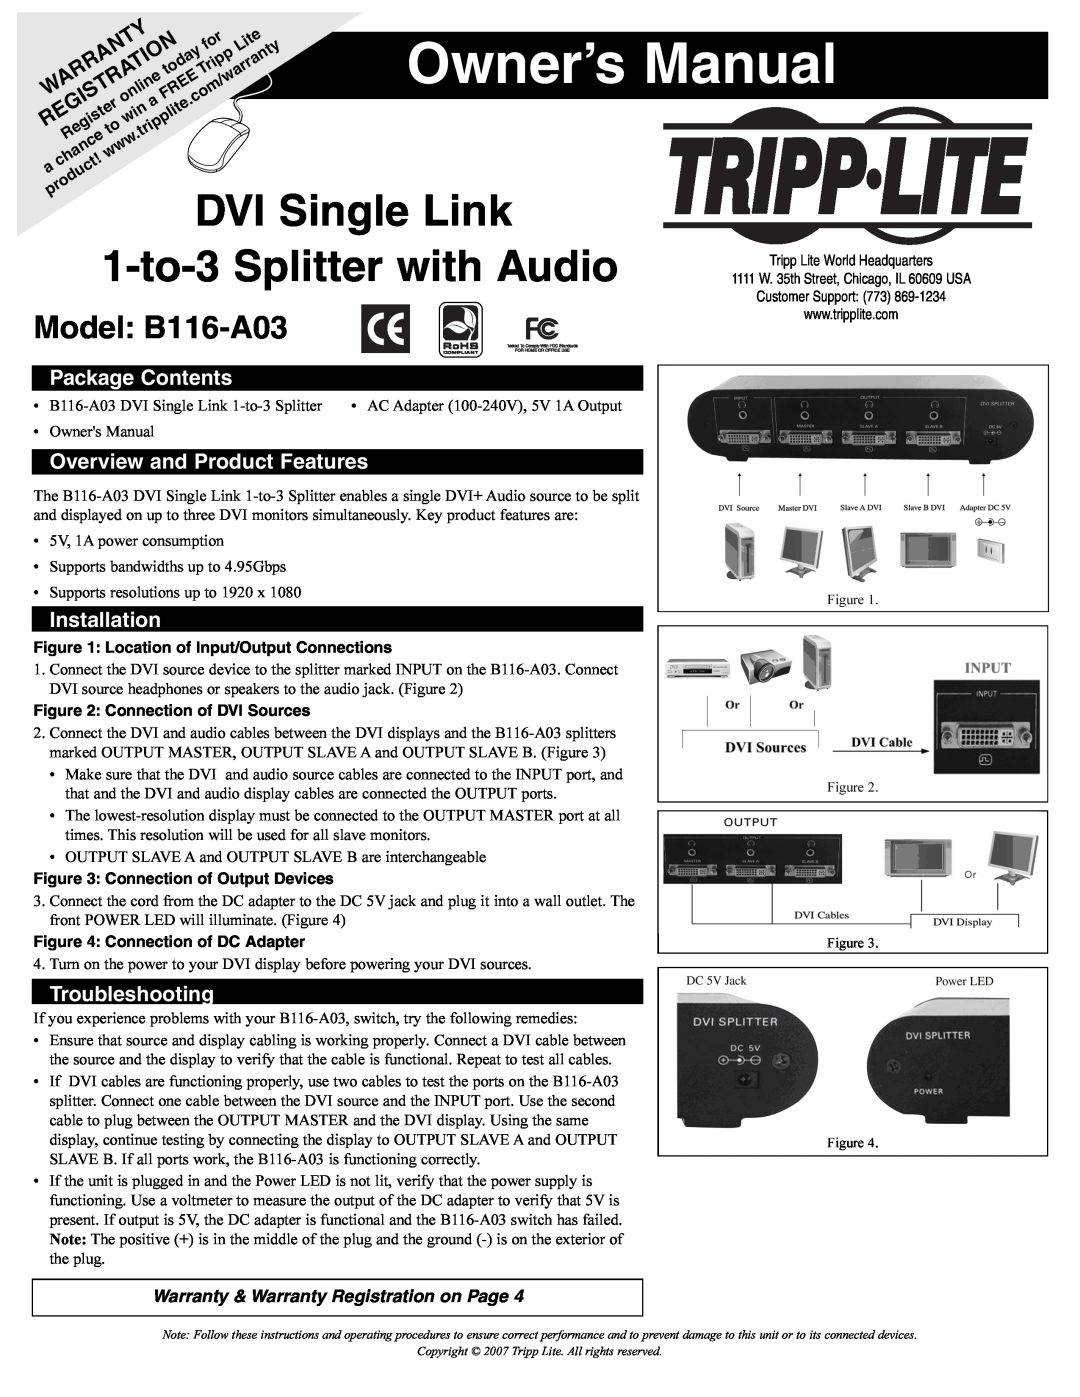 Tripp Lite owner manual Model B116-A03, Package Contents, Overview and Product Features, Installation, Troubleshooting 